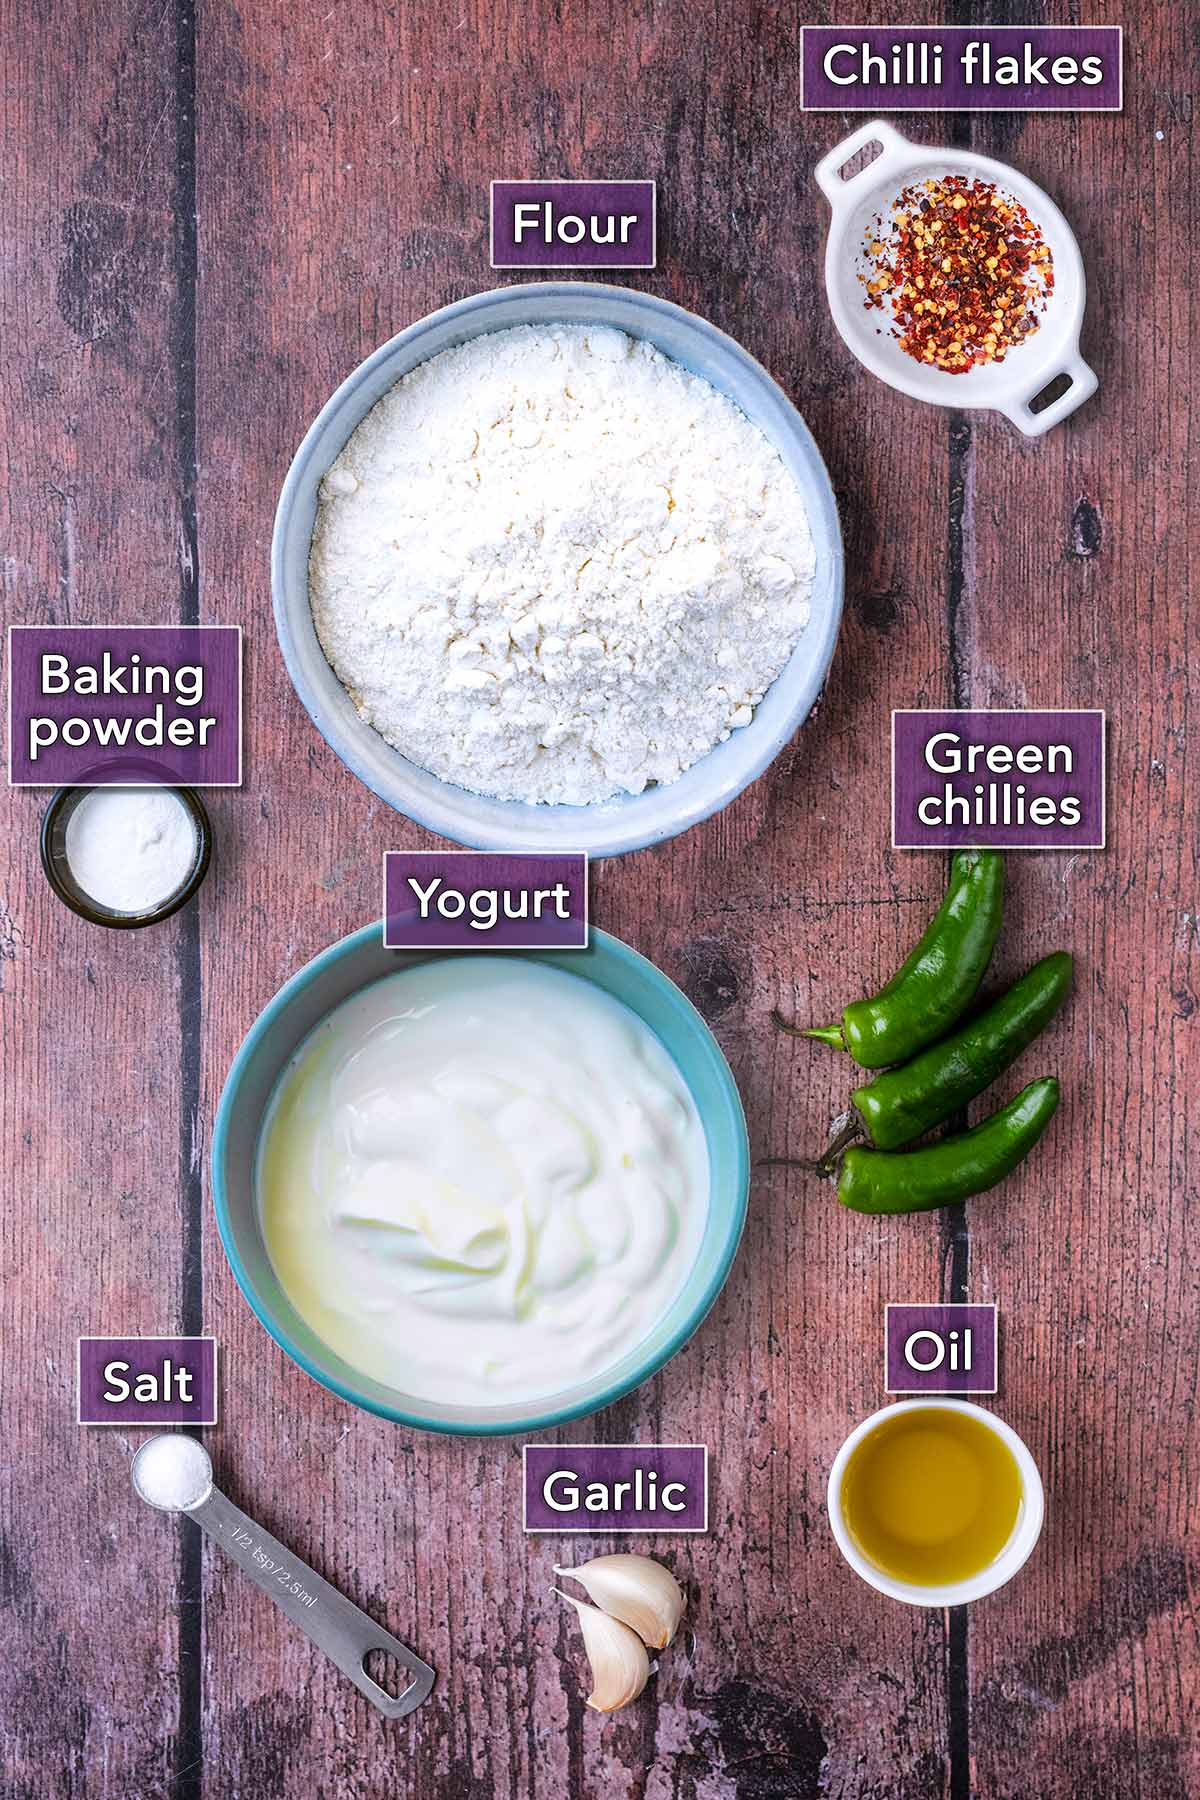 All the ingredients needed for this recipe each with a text overlay label.